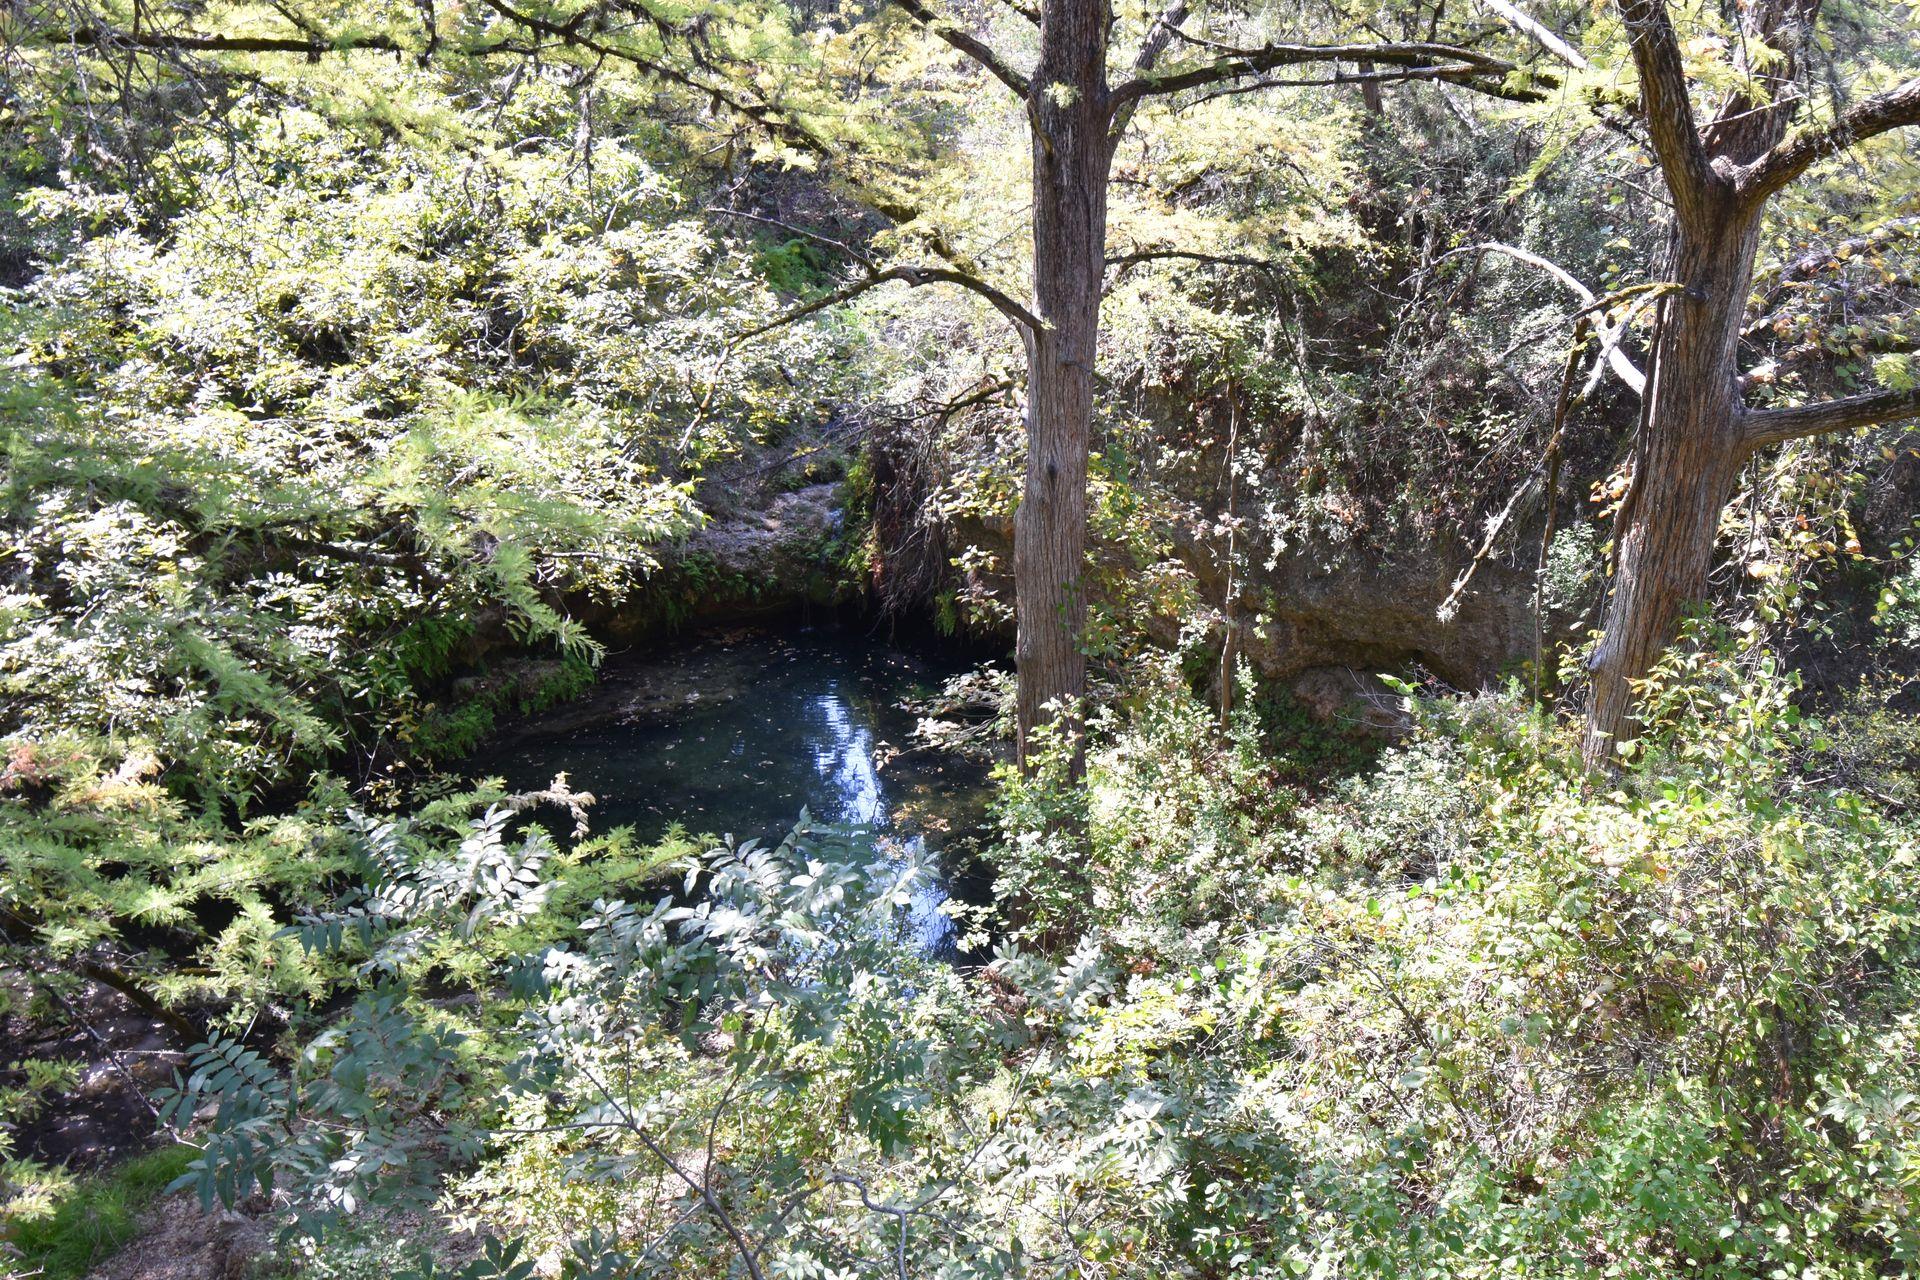 An area of green trees surrounding a cove area